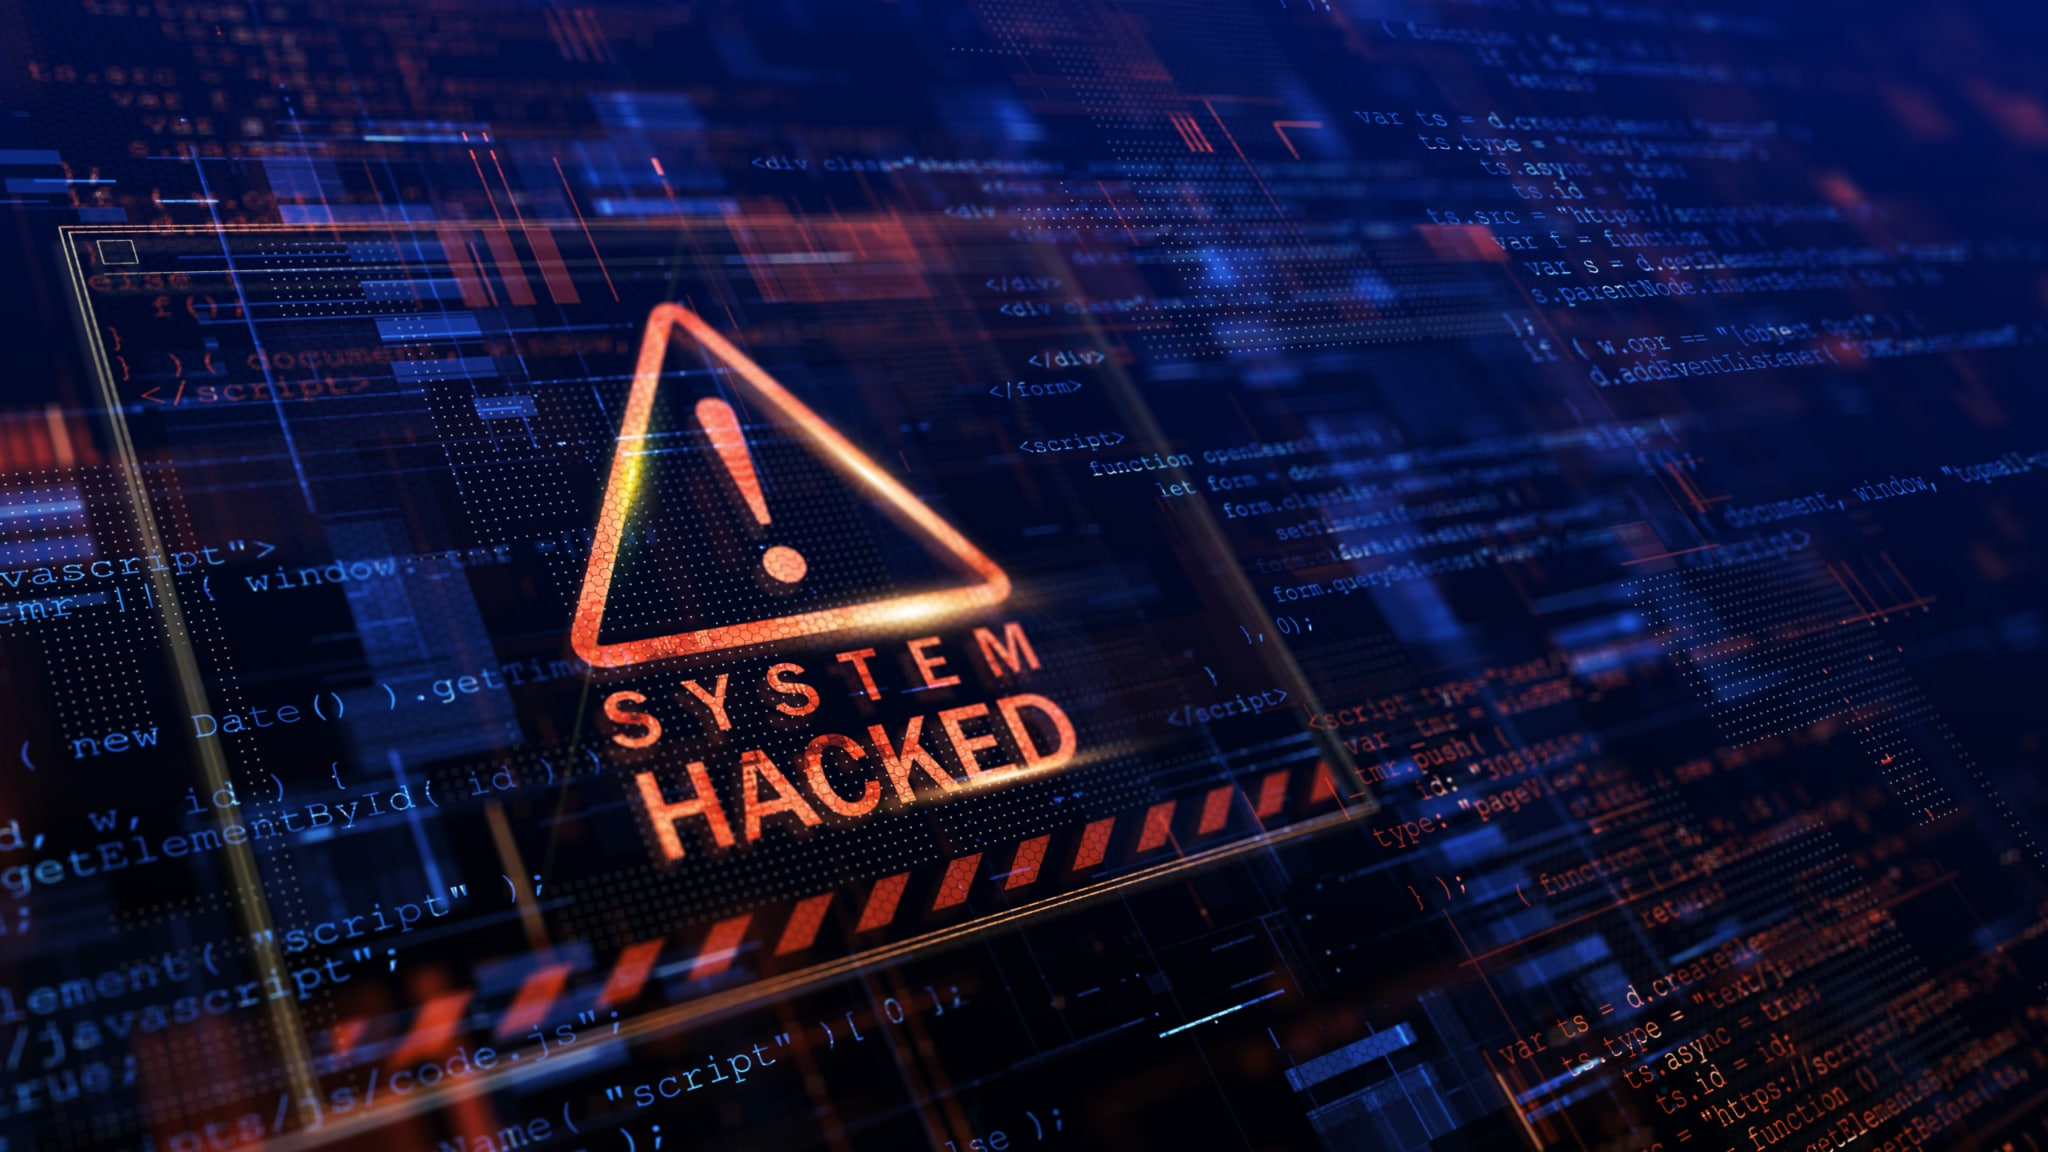 System Hacked notice with caution triangle in red